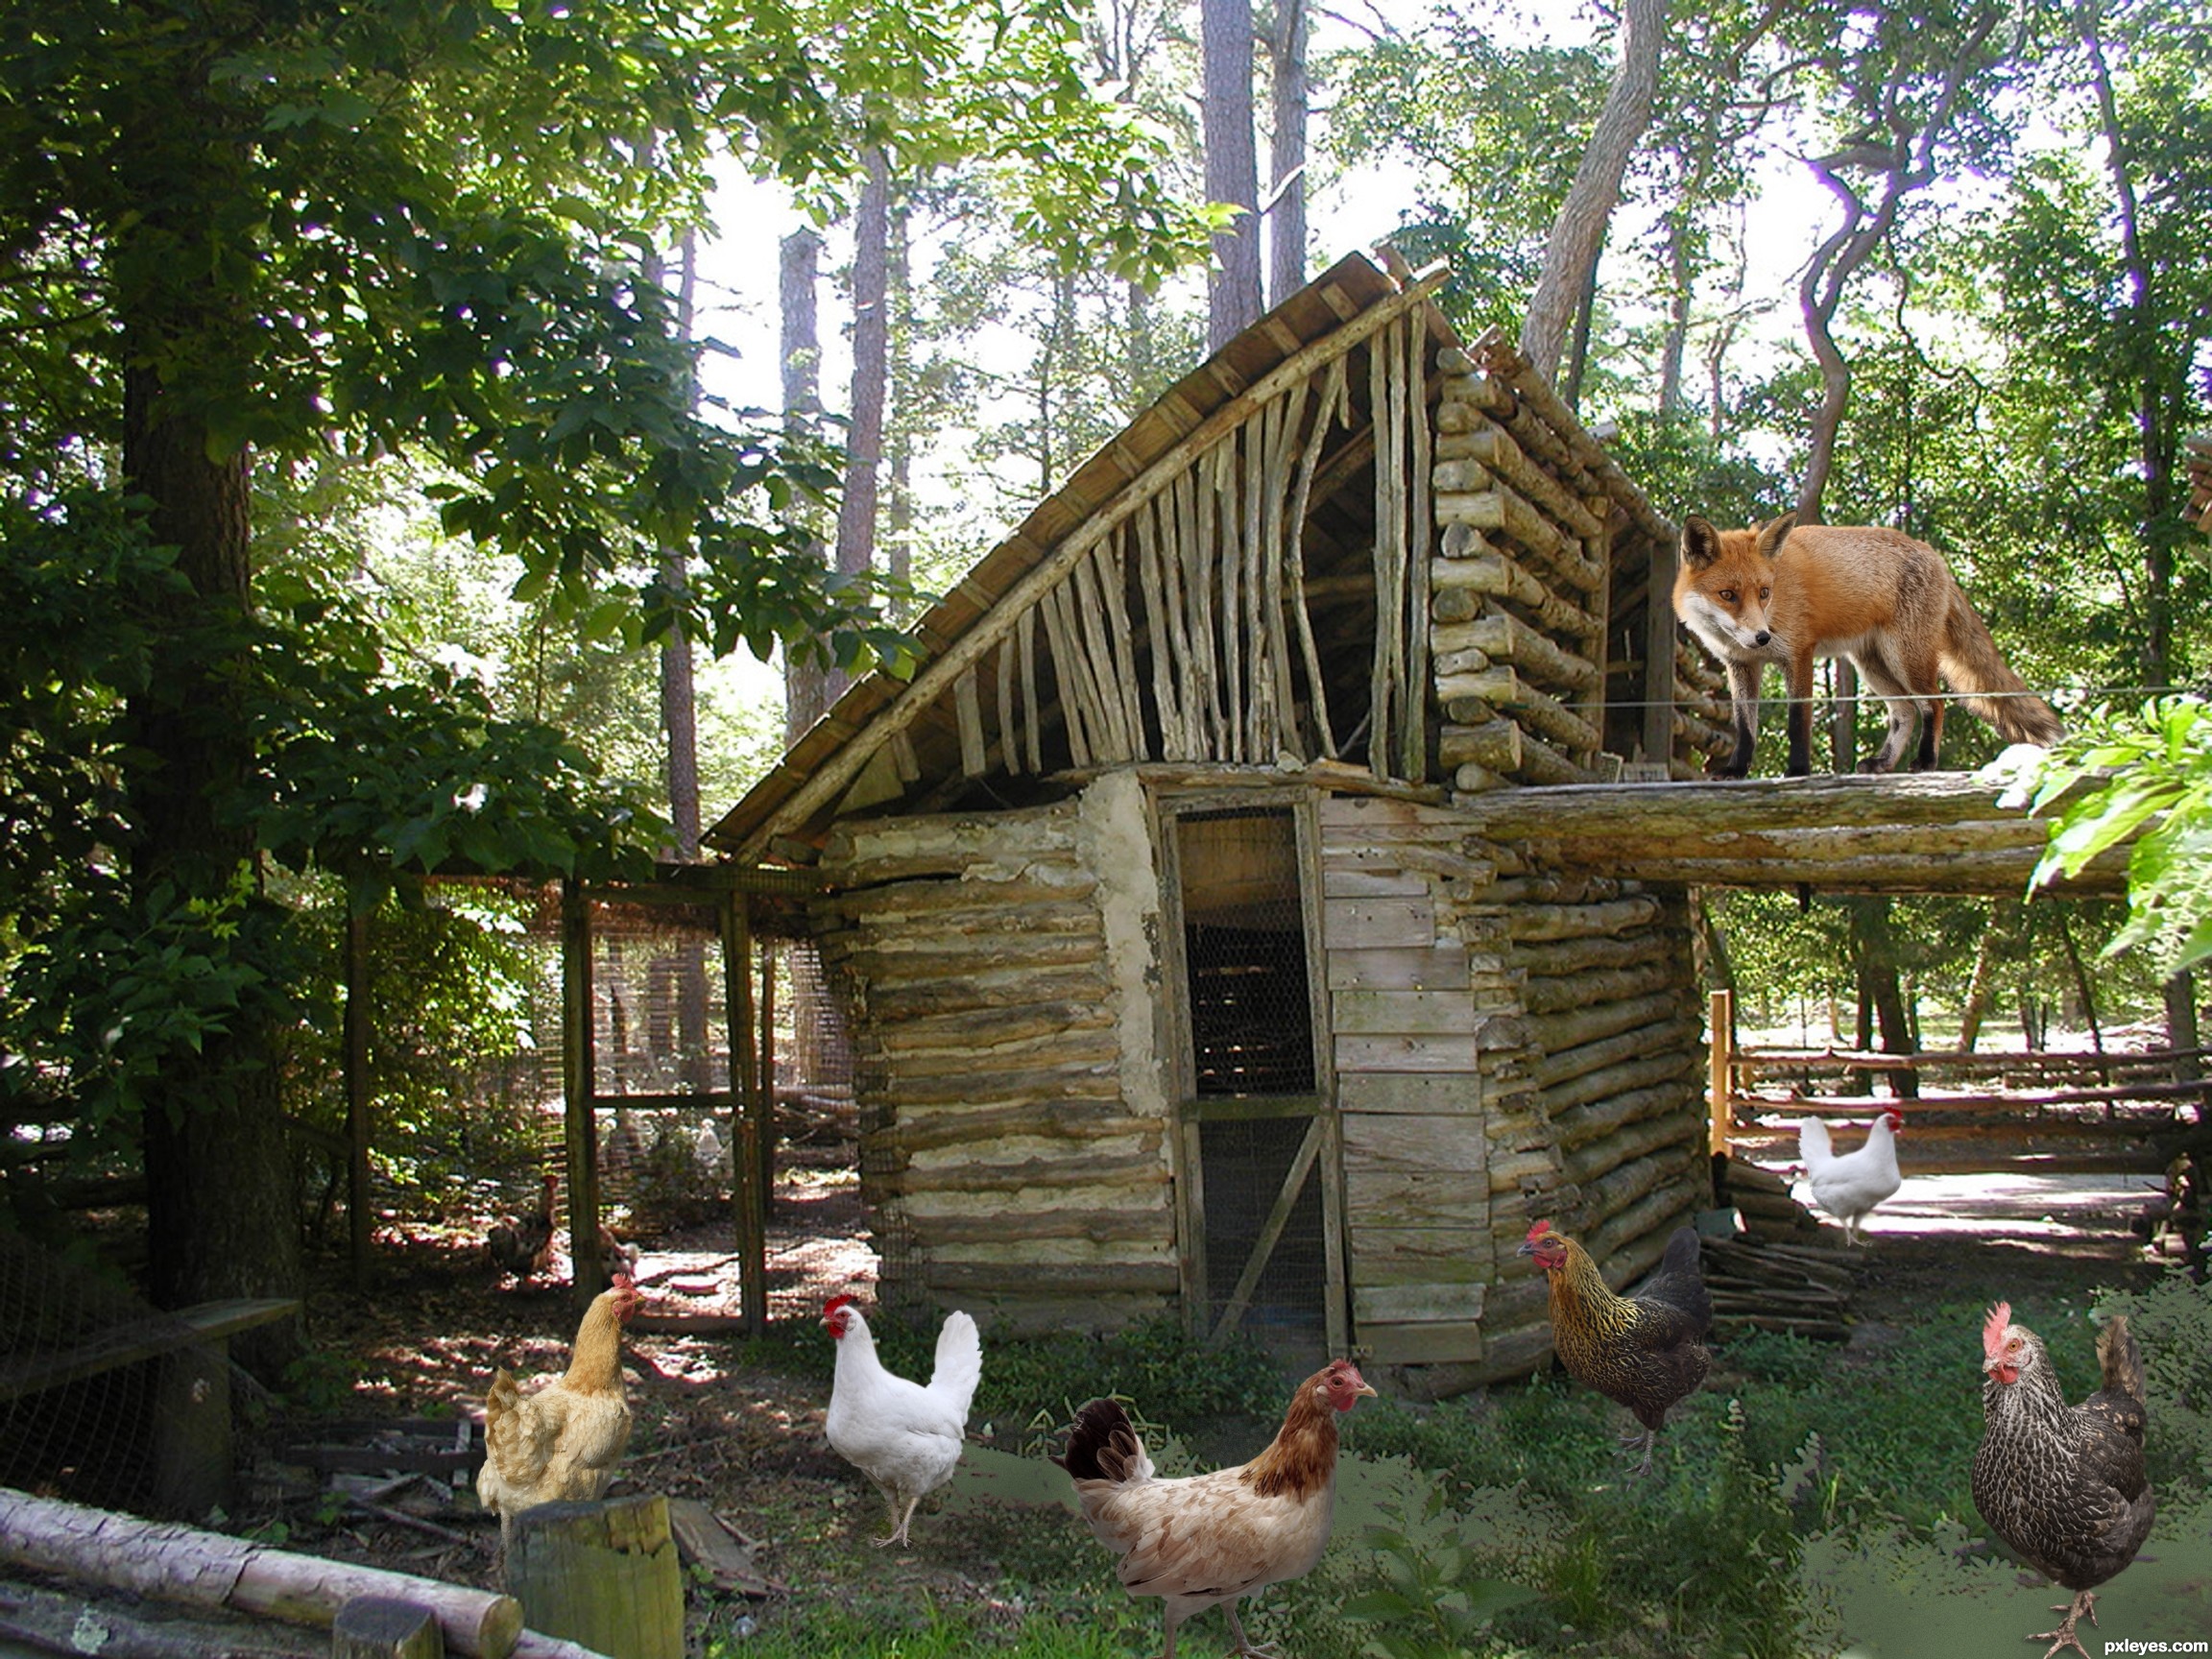 Fox guarding the hen house picture, by CMYK46 for: guardians photoshop 